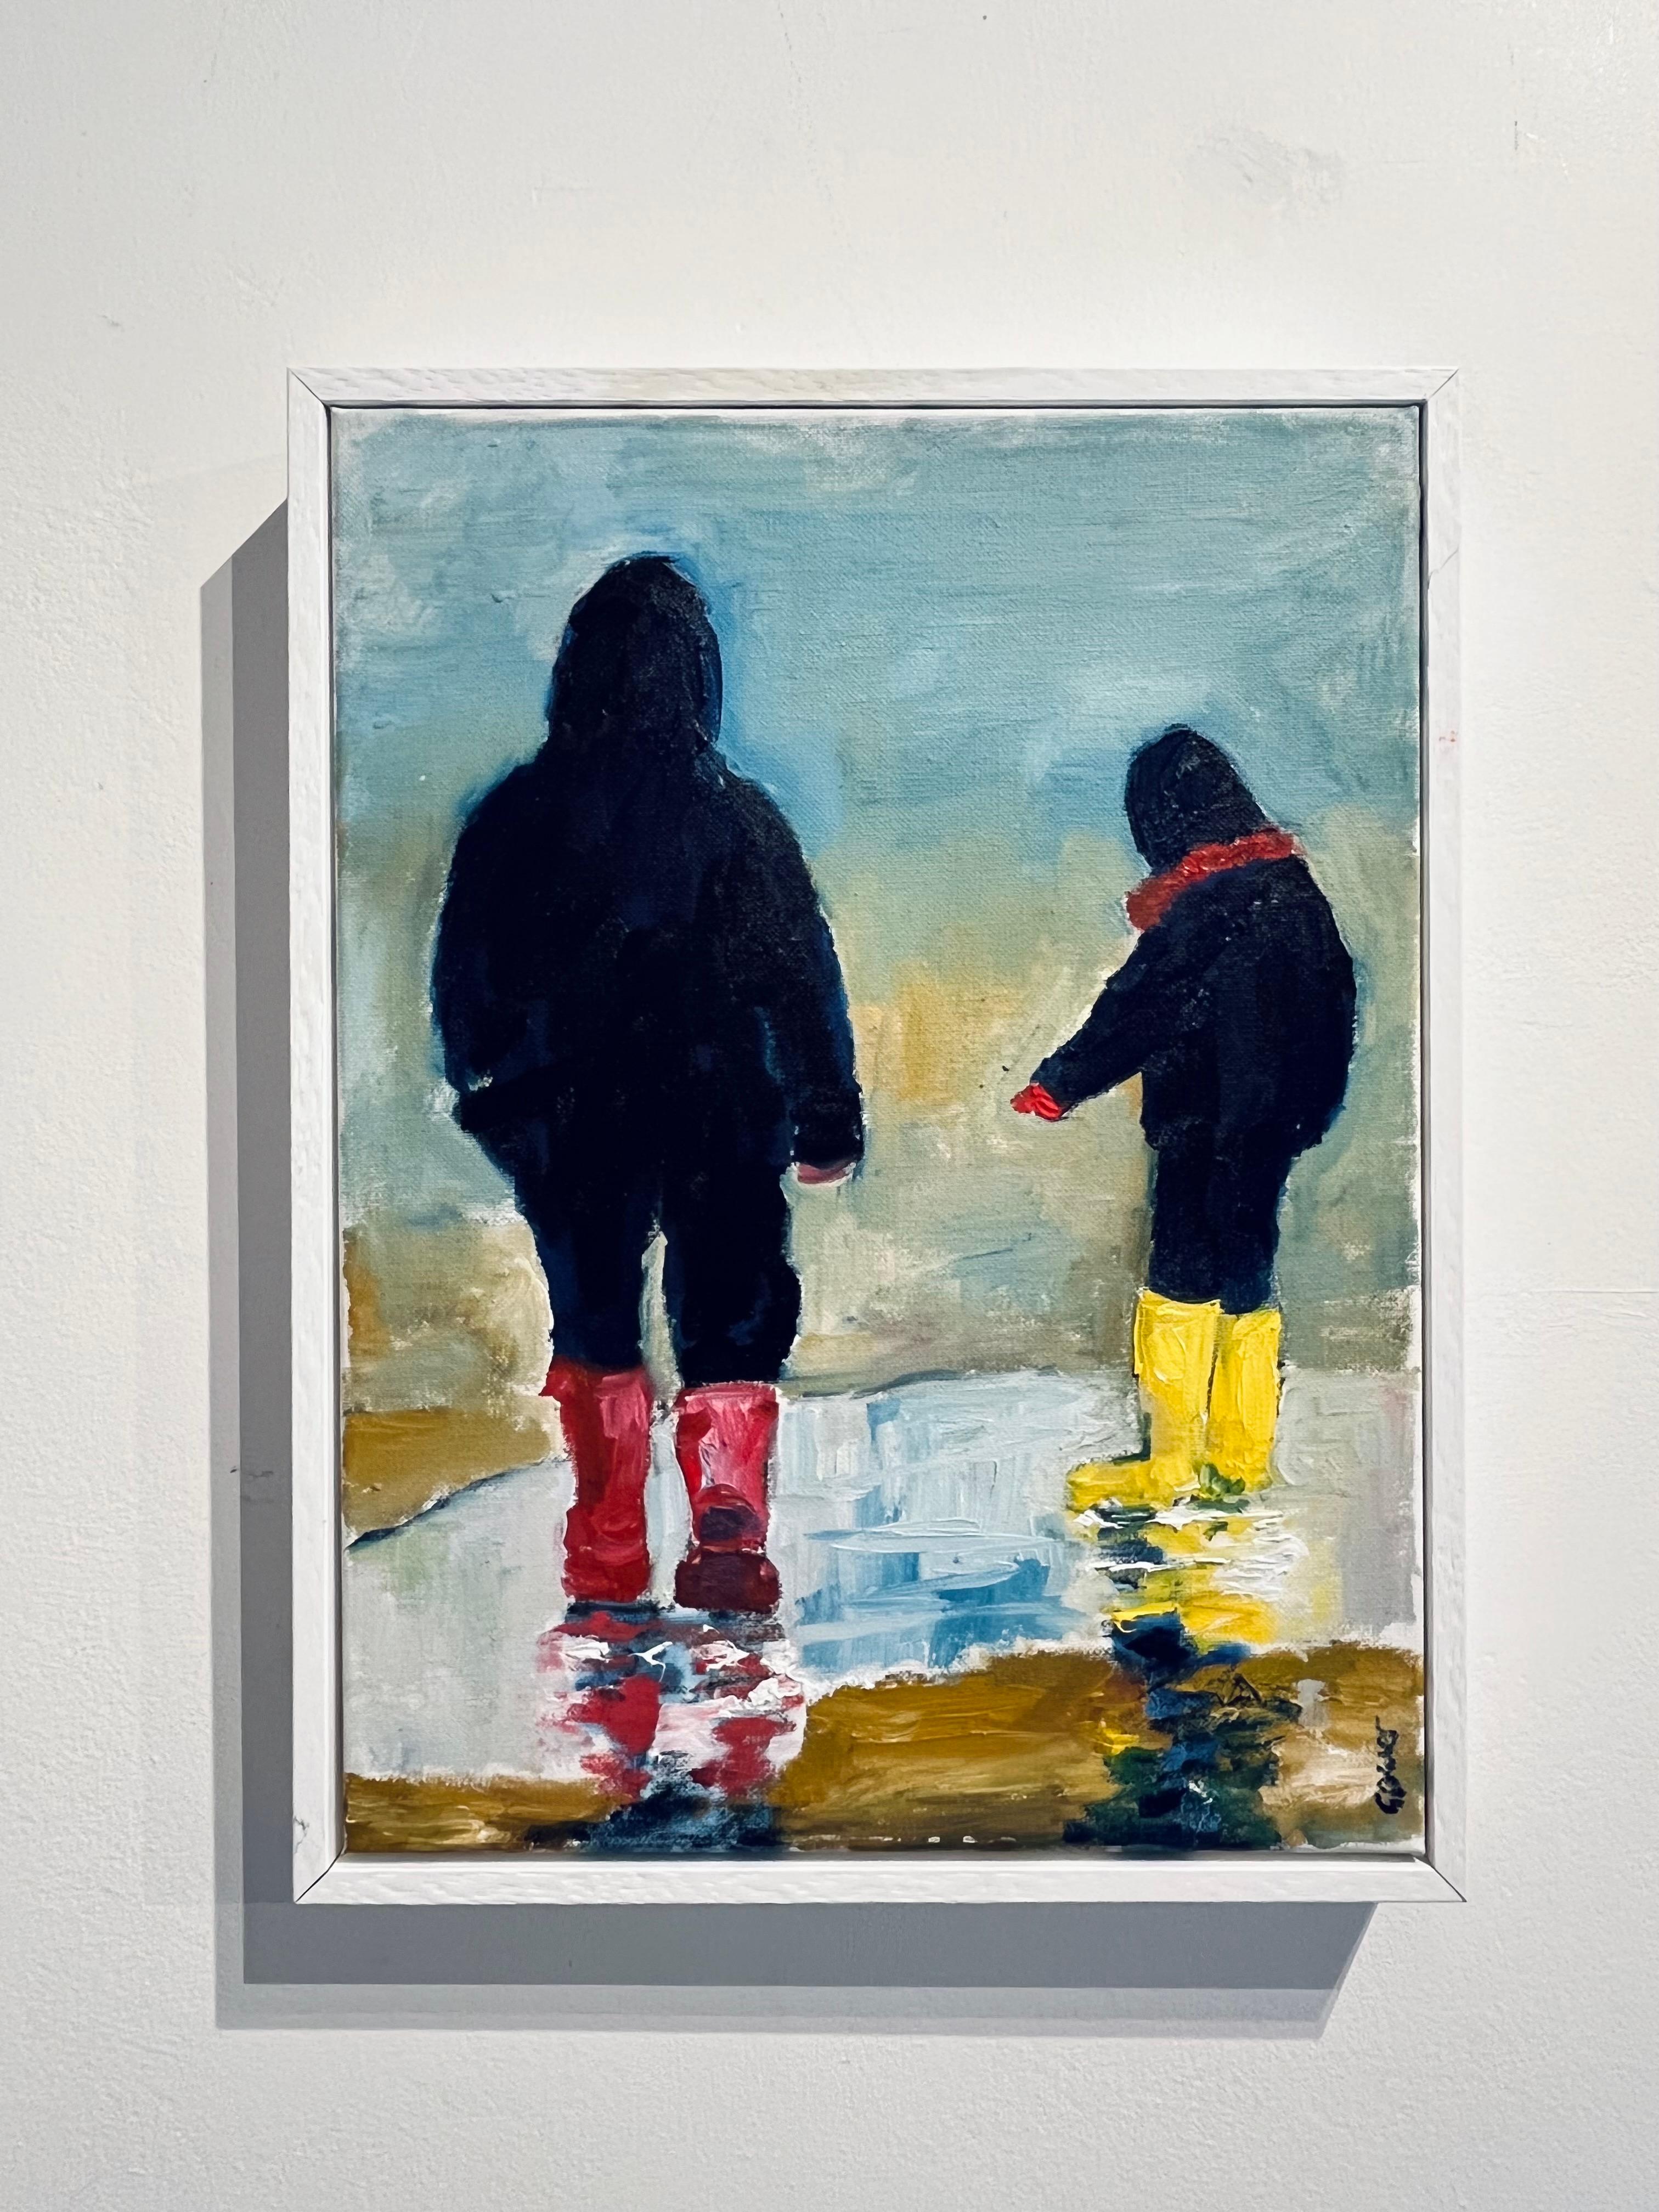 Wellies III- contemporary landscape art - original figurative oil painting - Painting by Richard Gower